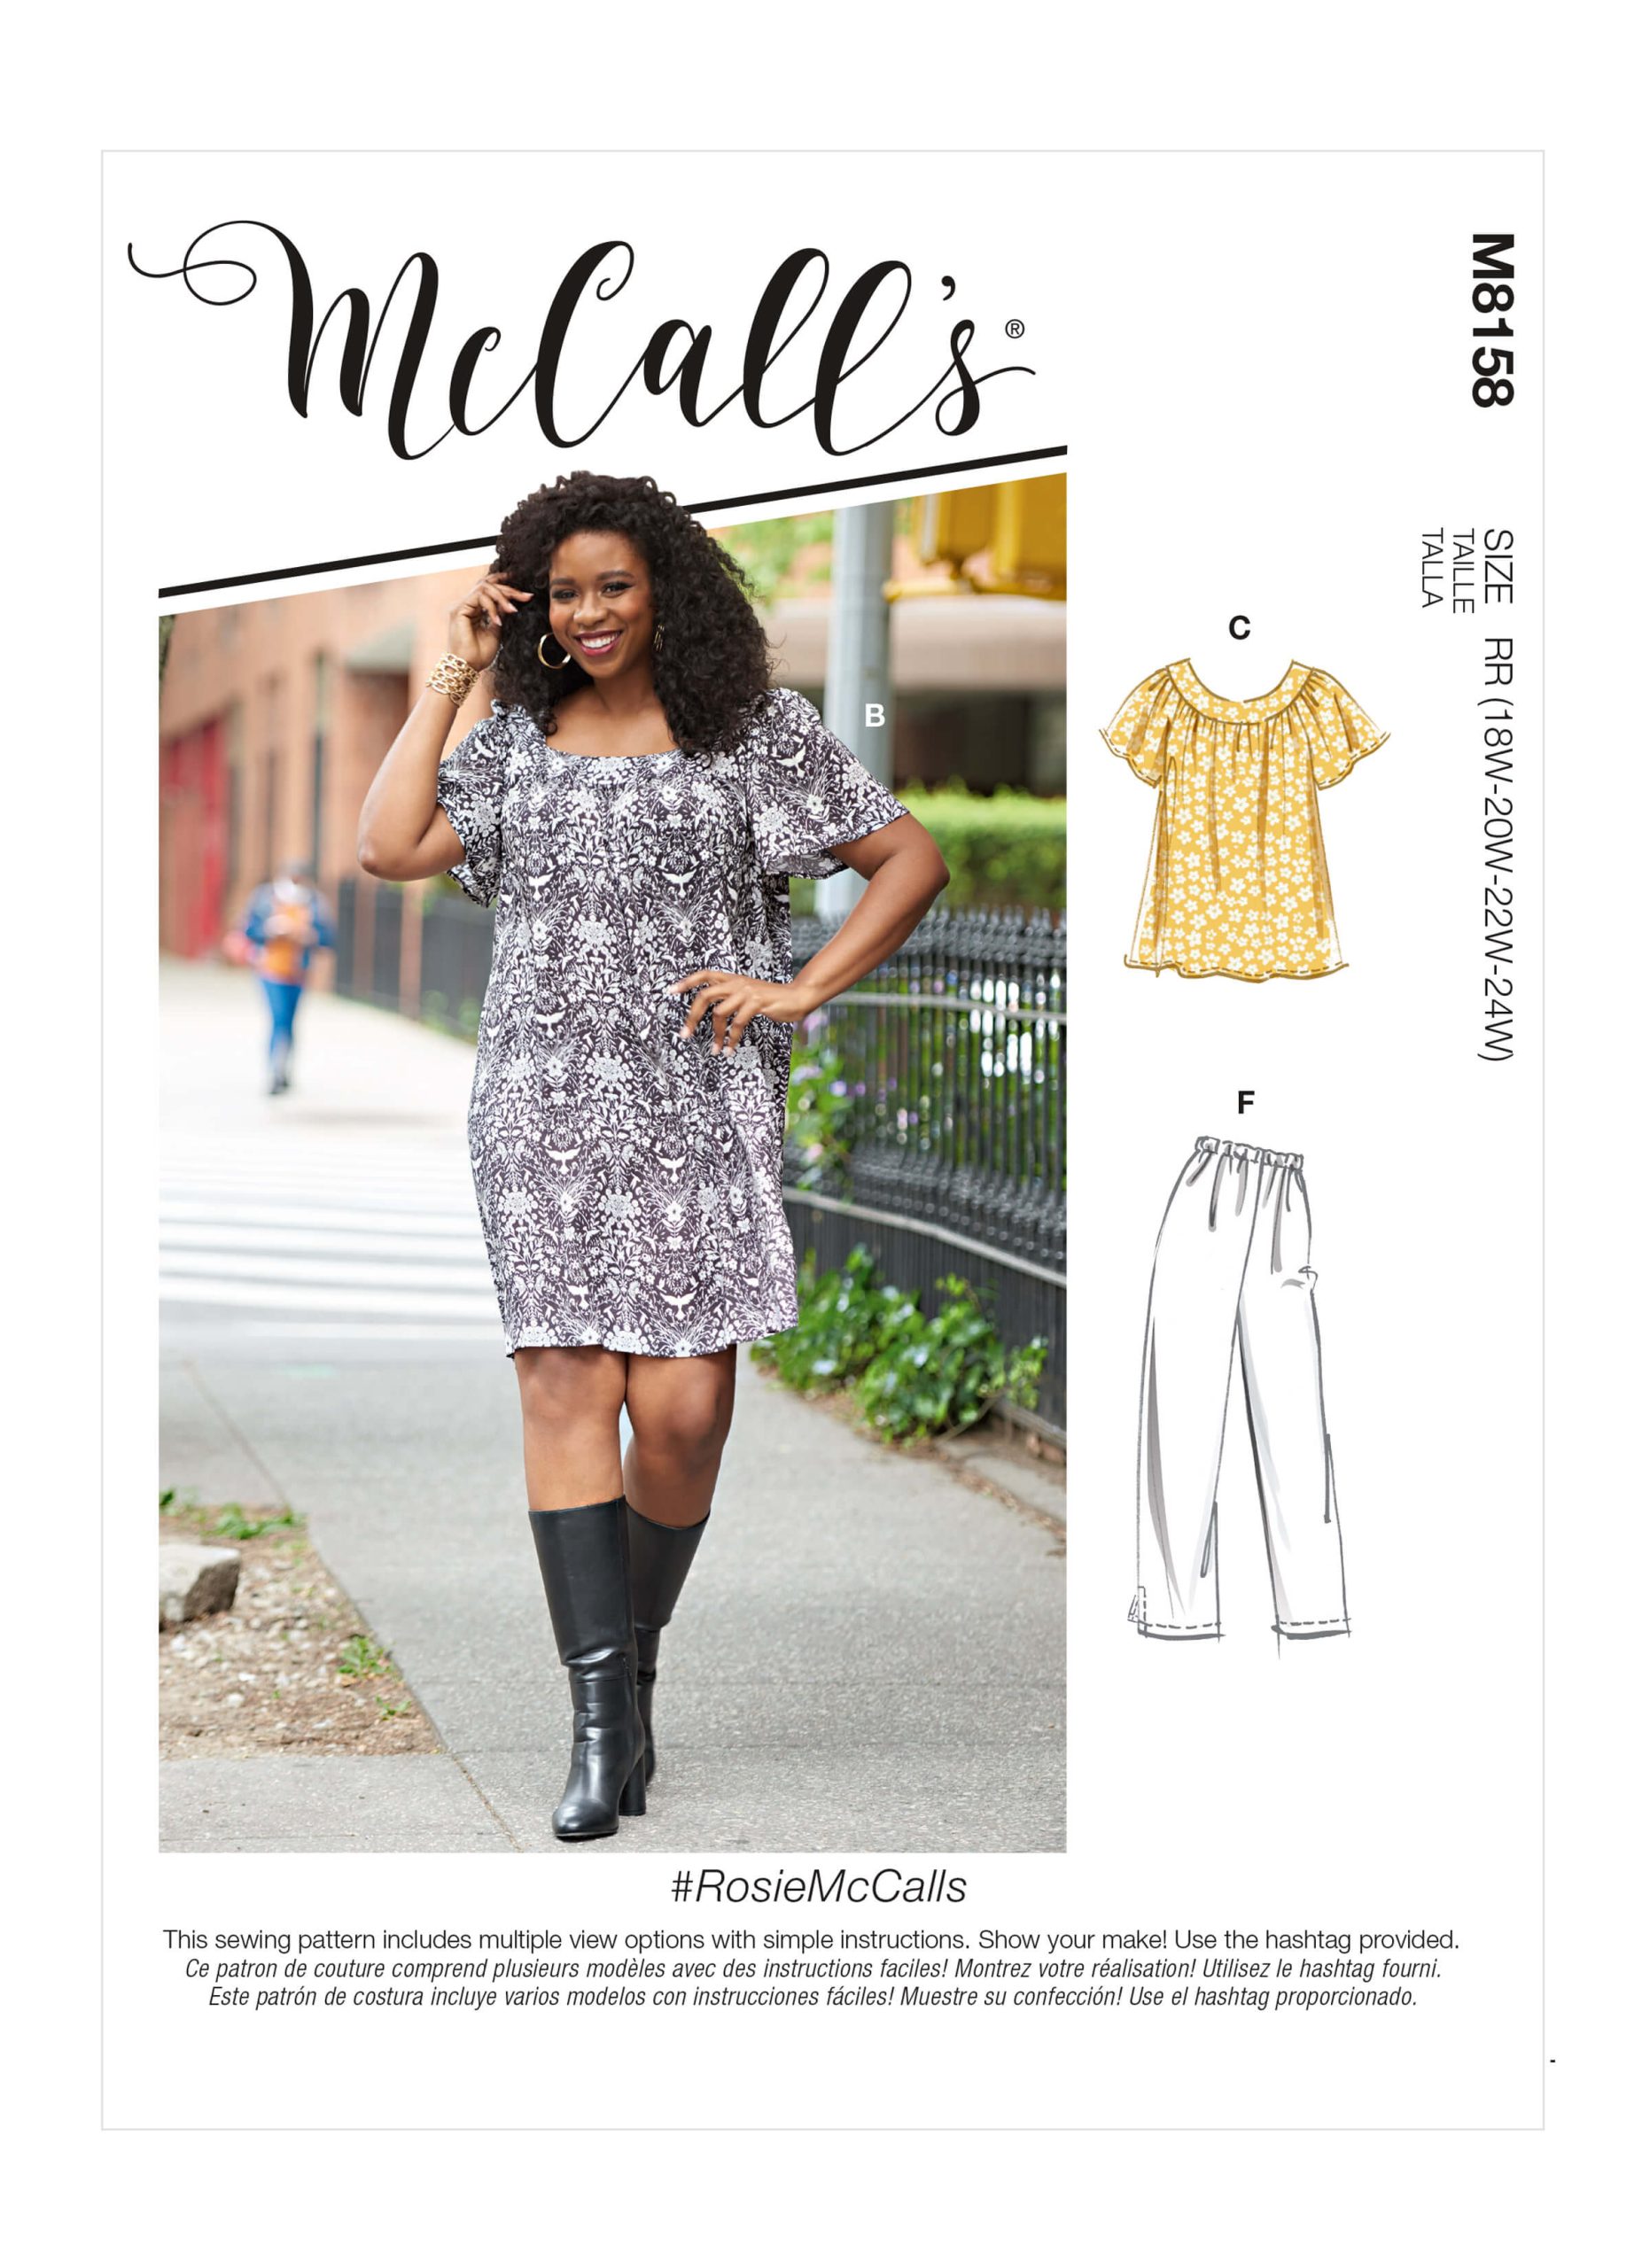 McCall's Sewing Pattern M8158 Women's Top, Dresses, Shorts and Capri Pants #RosieMcCalls